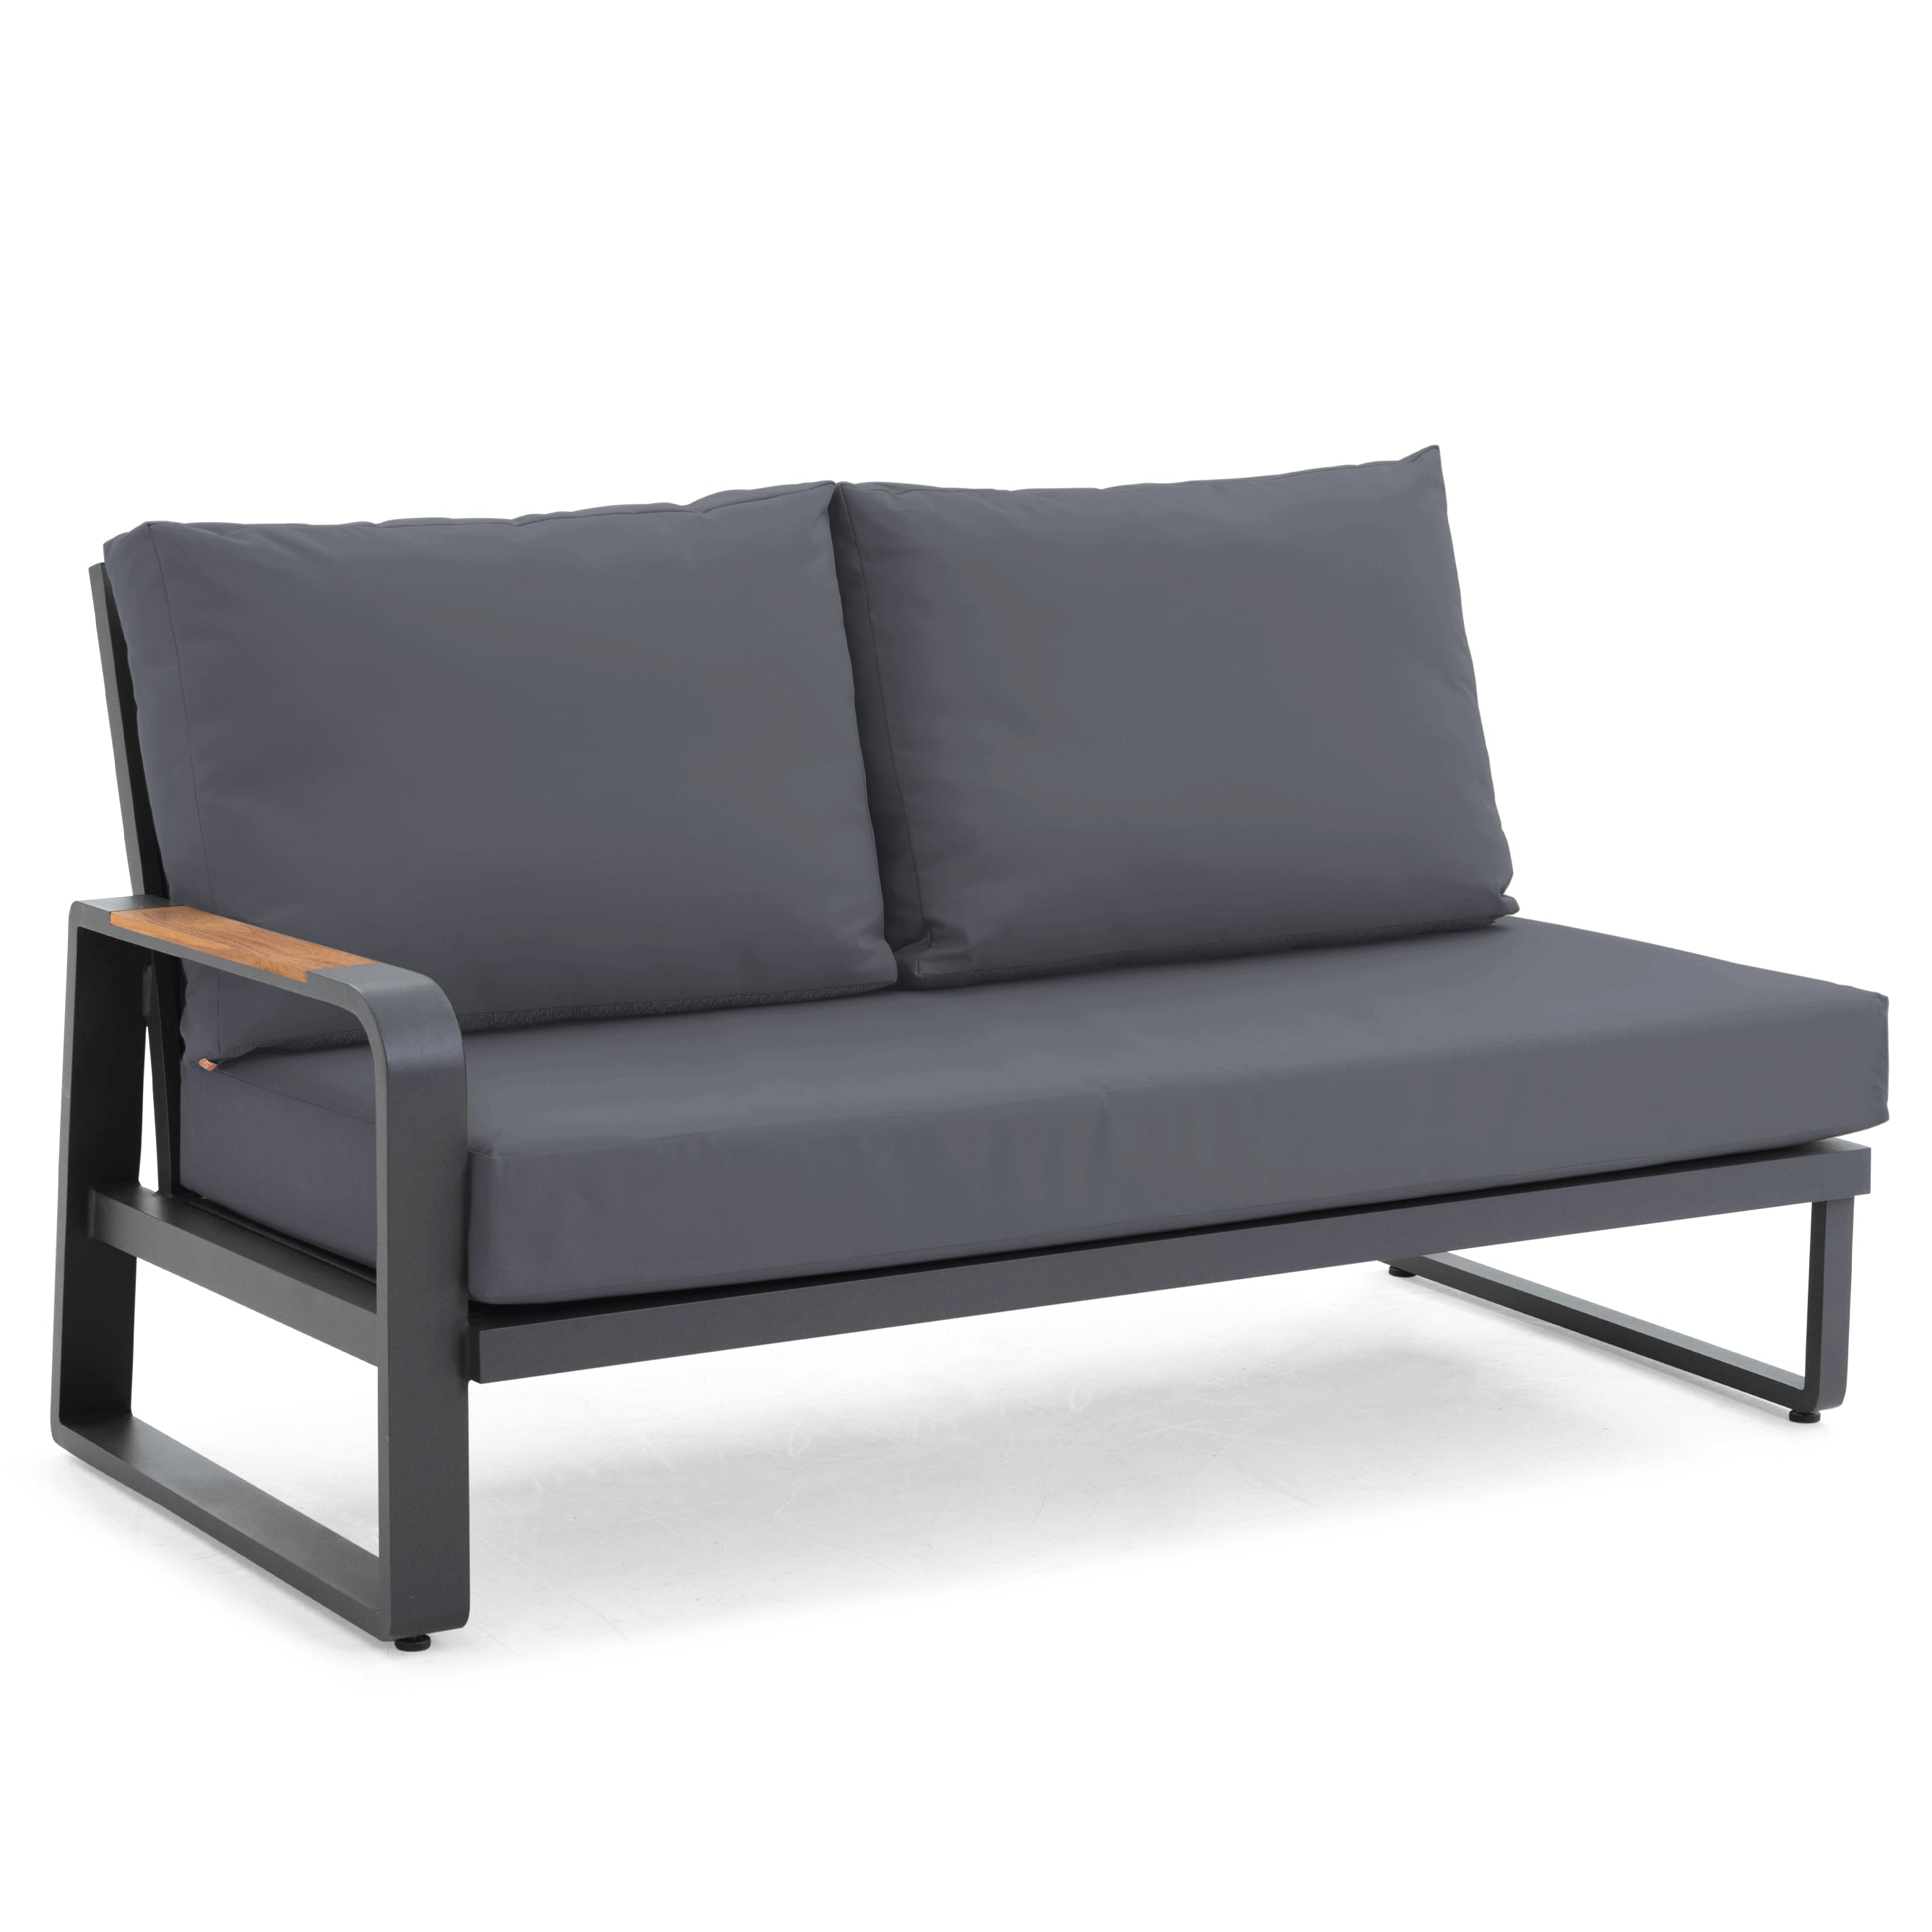 The Montana Corner Sectional features FSC certified Brazilian teak components, Sunbrella cushions and weatherproof powder coated aluminum construction in a sectional set-up that makes coordinating your outdoor space a snap 